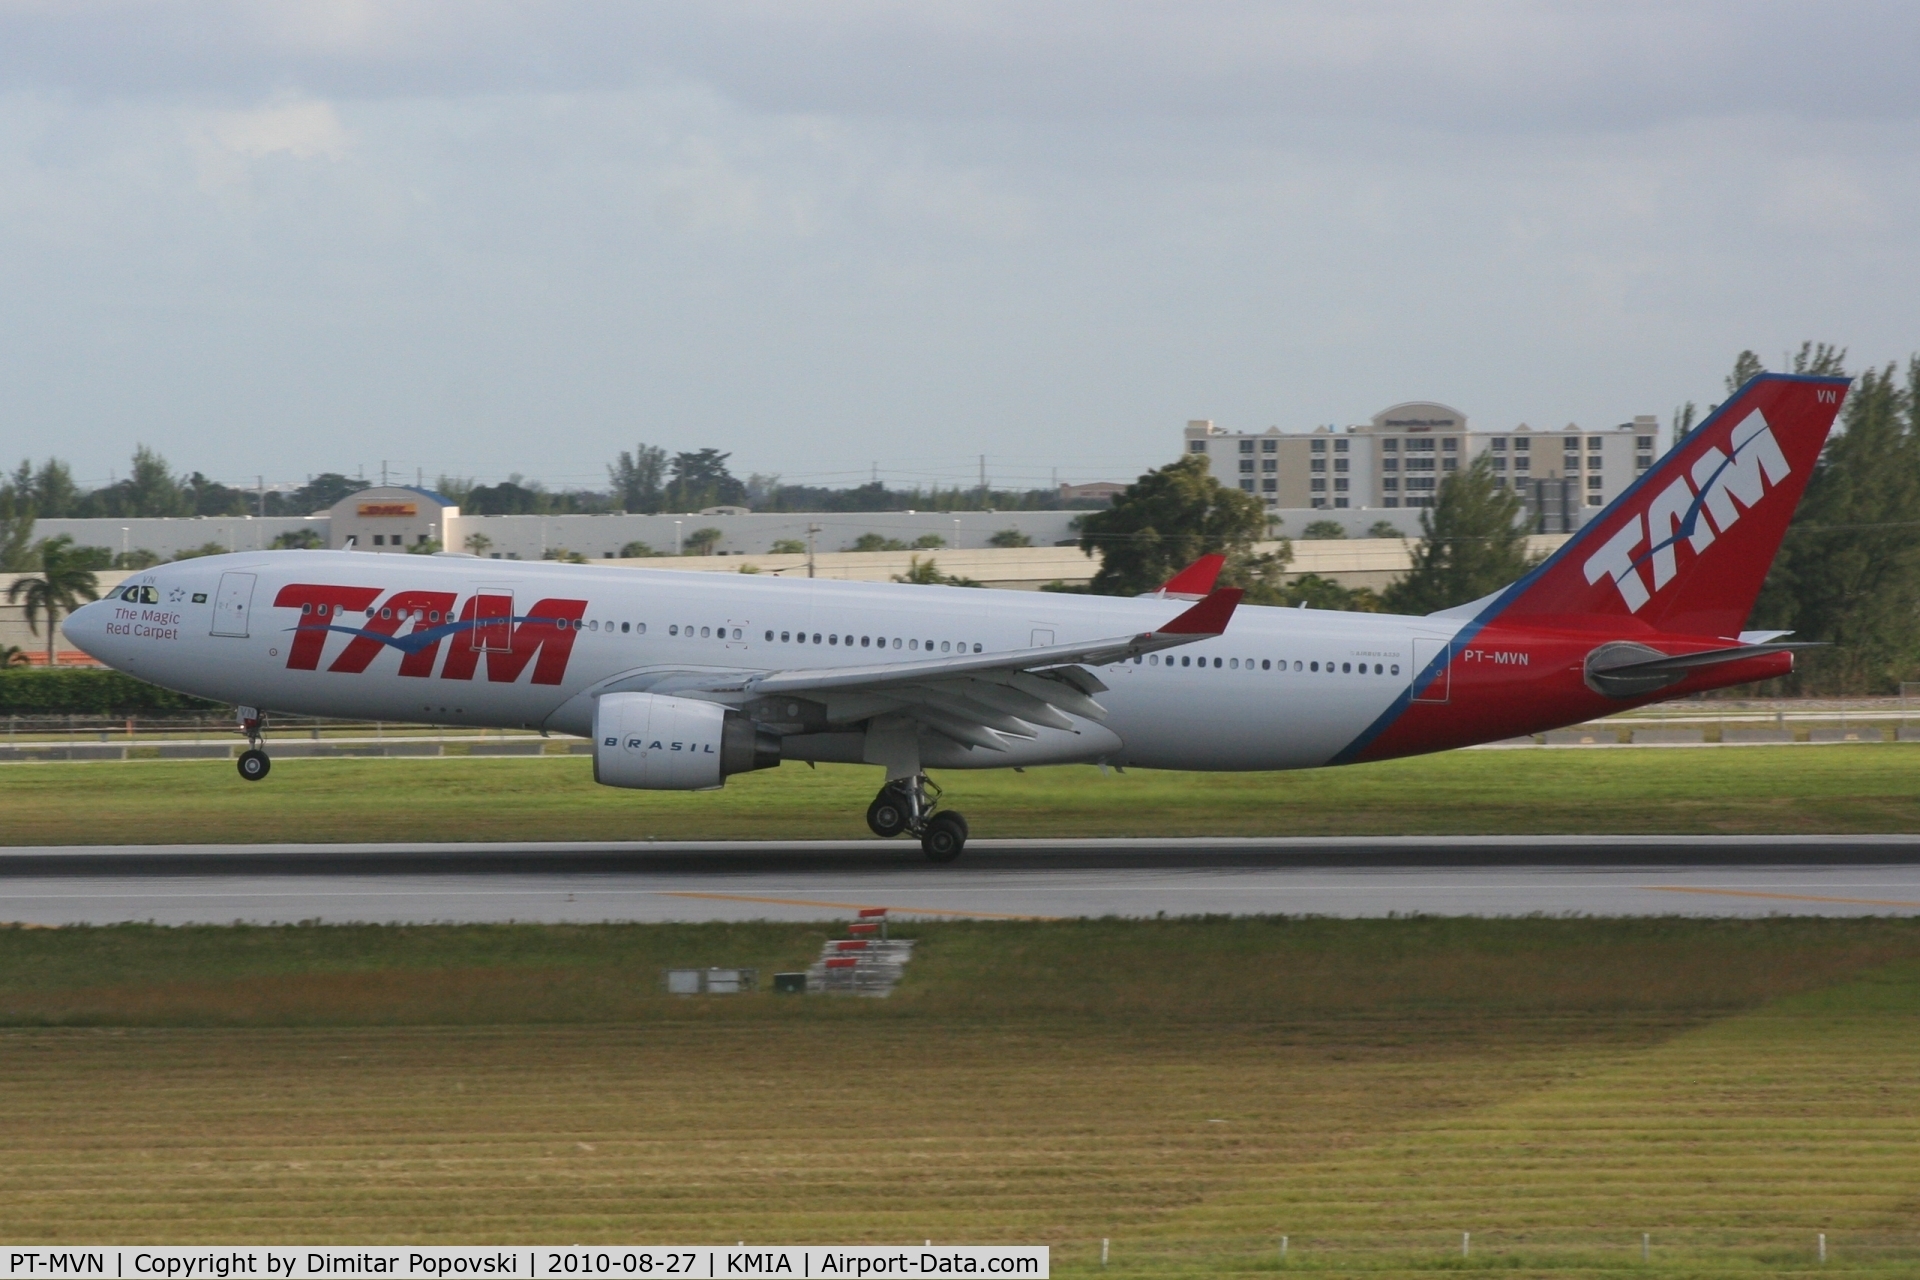 PT-MVN, 2007 Airbus A330-203 C/N 876, arrival of flight 8094 from Sao Paulo